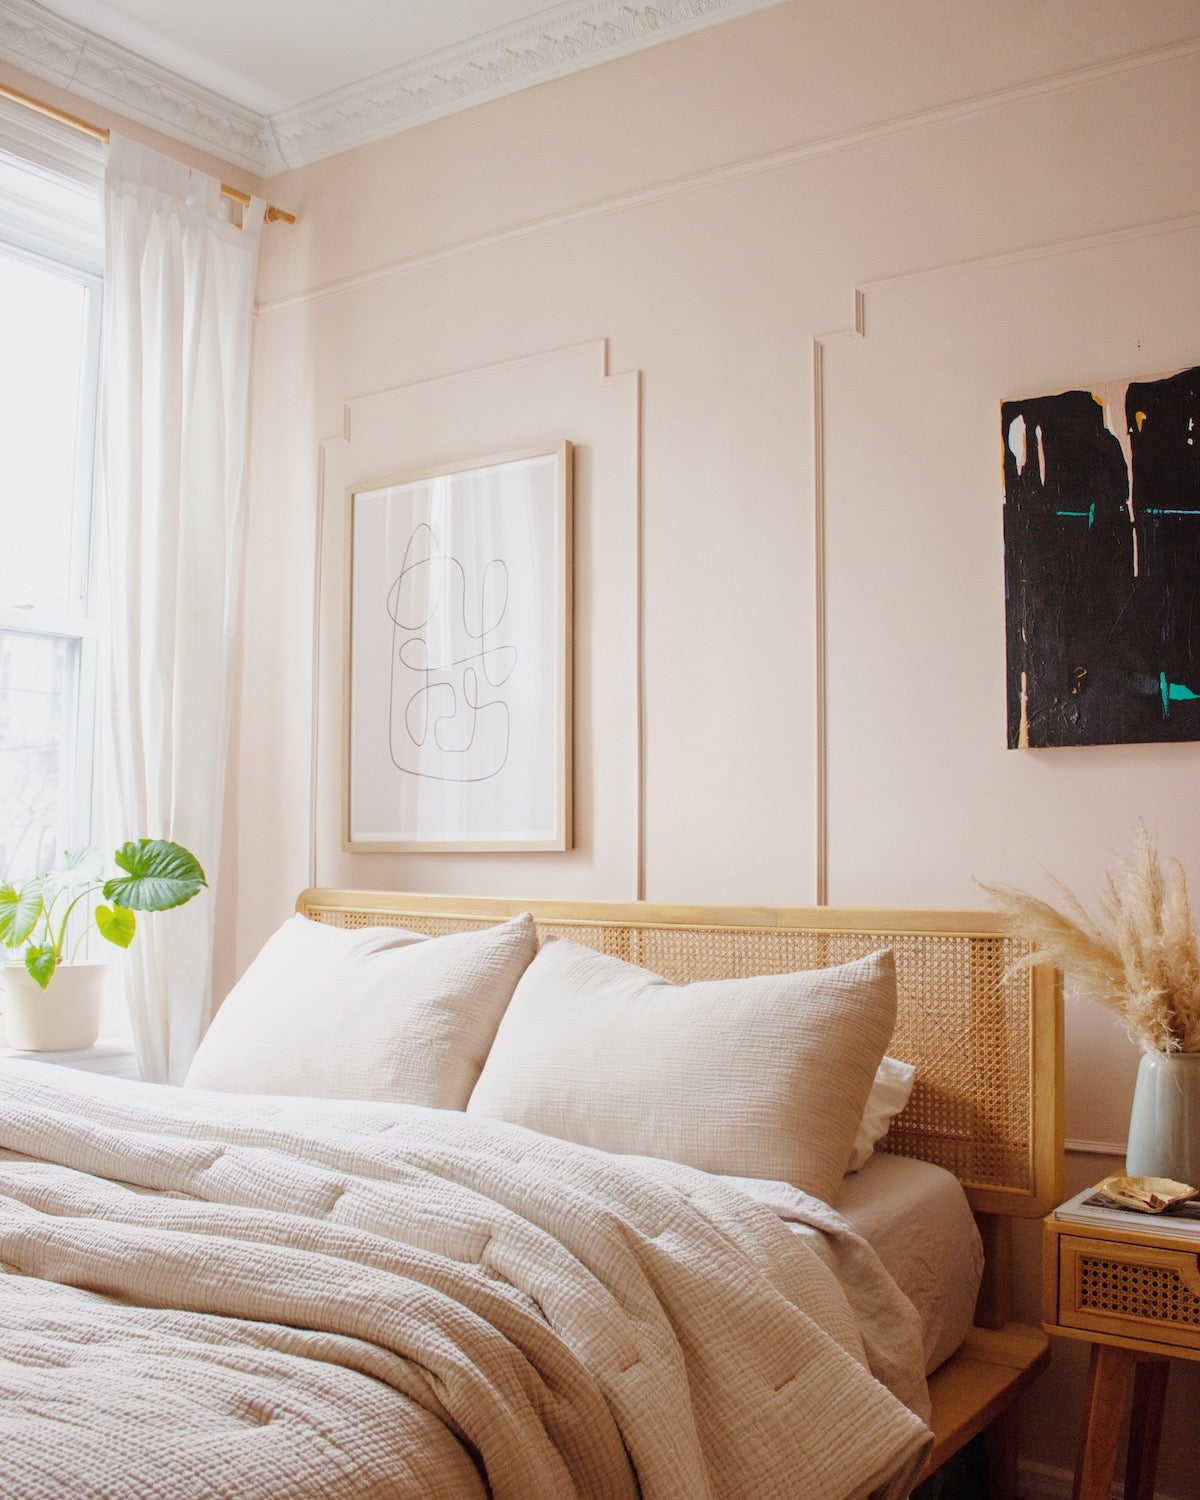 Bedroom decorated in all blush with small plant in corner